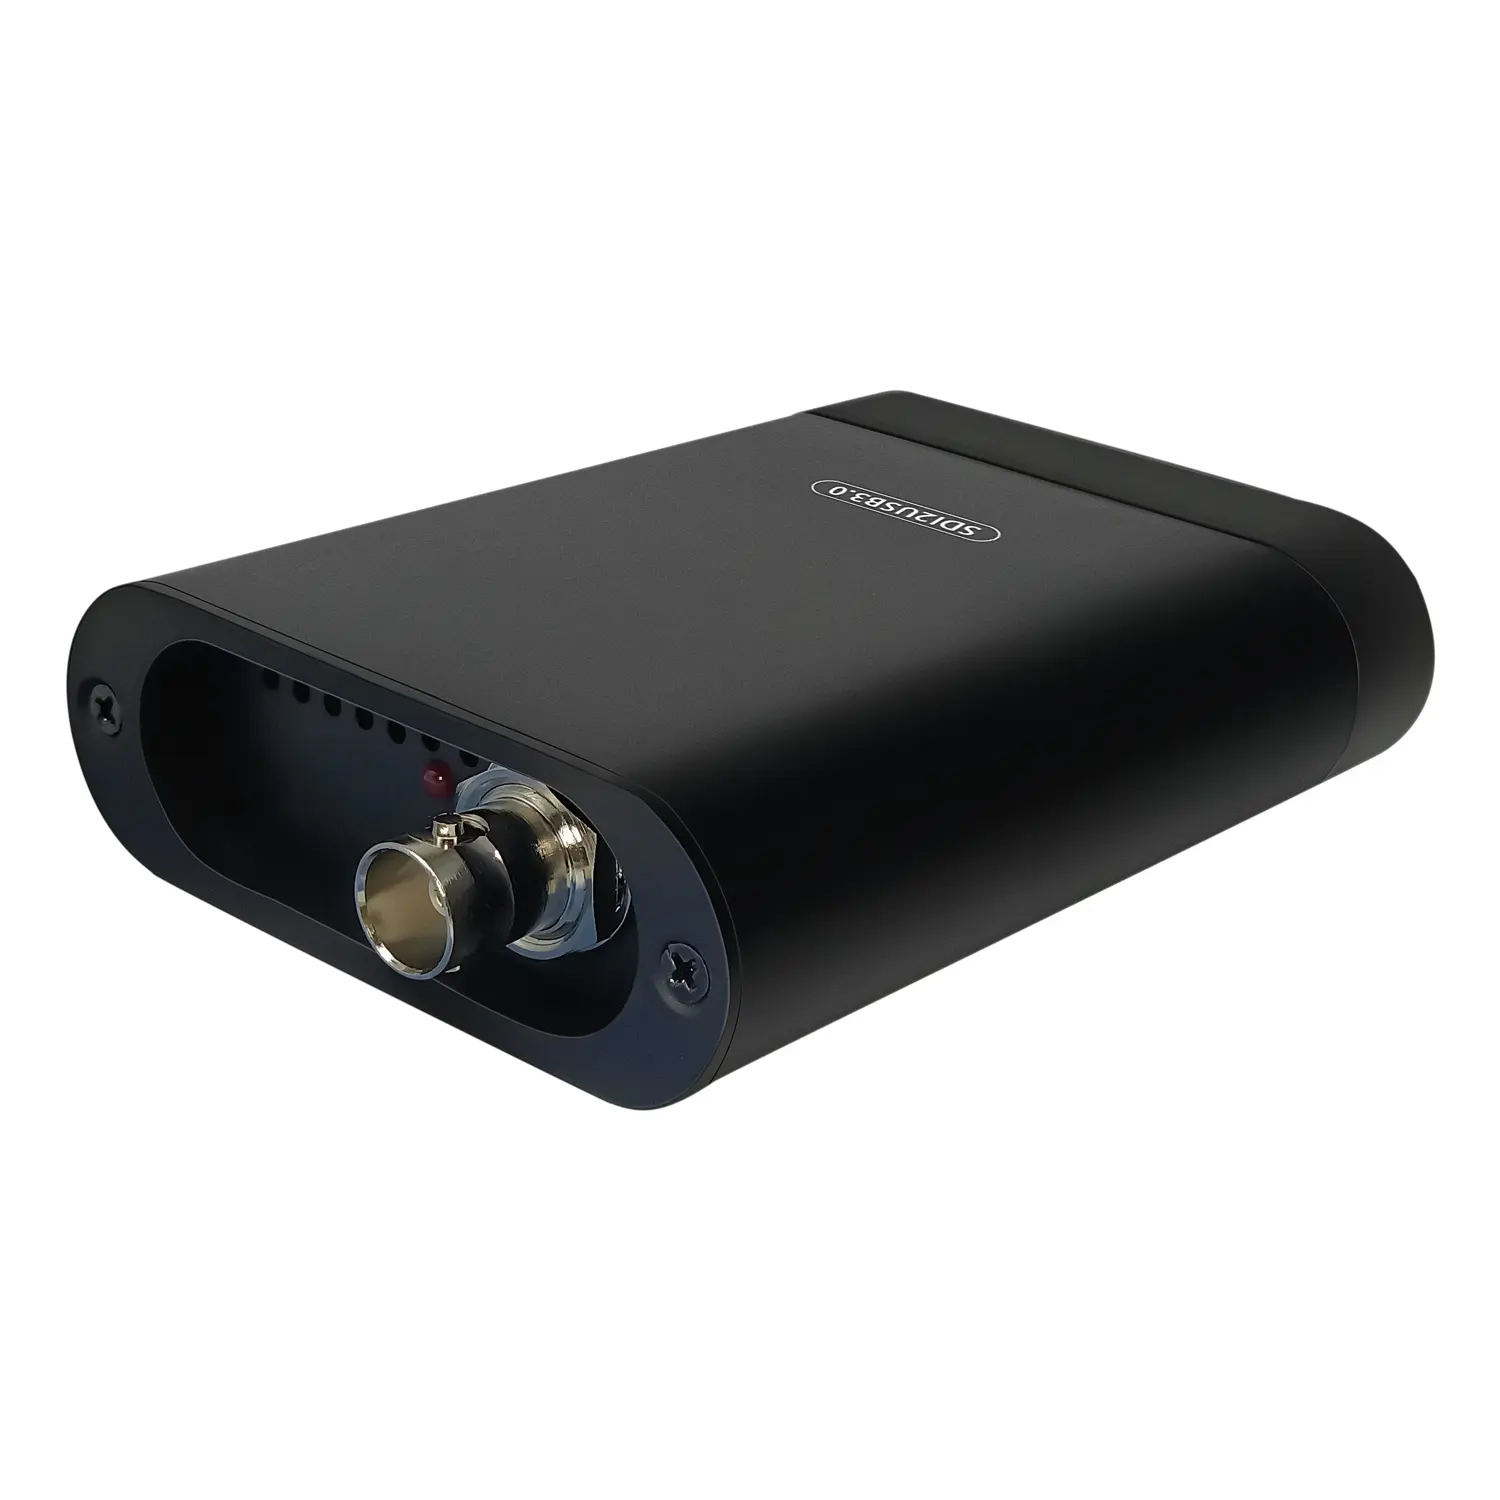 UNISHEEN Zoom Camera Streaming Linux Win10 Mac Android 1080p Vmix OBS Xsplit 3G SDI Video Capture Card Box Dongle Grabber